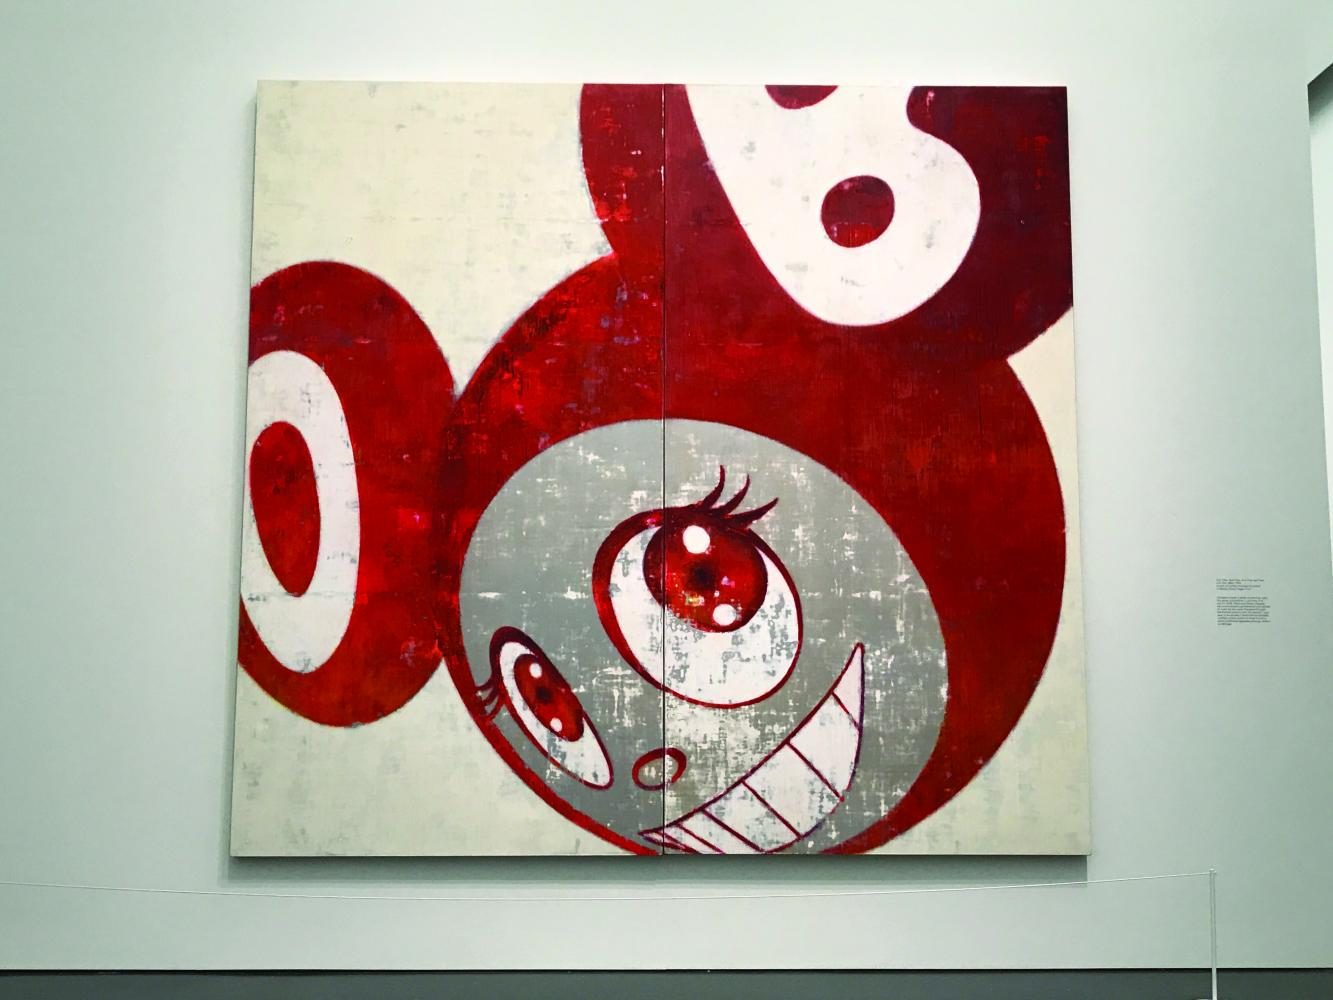 And Then, And Then , And Then, and Then, and Then (Red), 1996. A series of paintings with similar compositions phased out through time. Murakami names this face MR. DOB.   